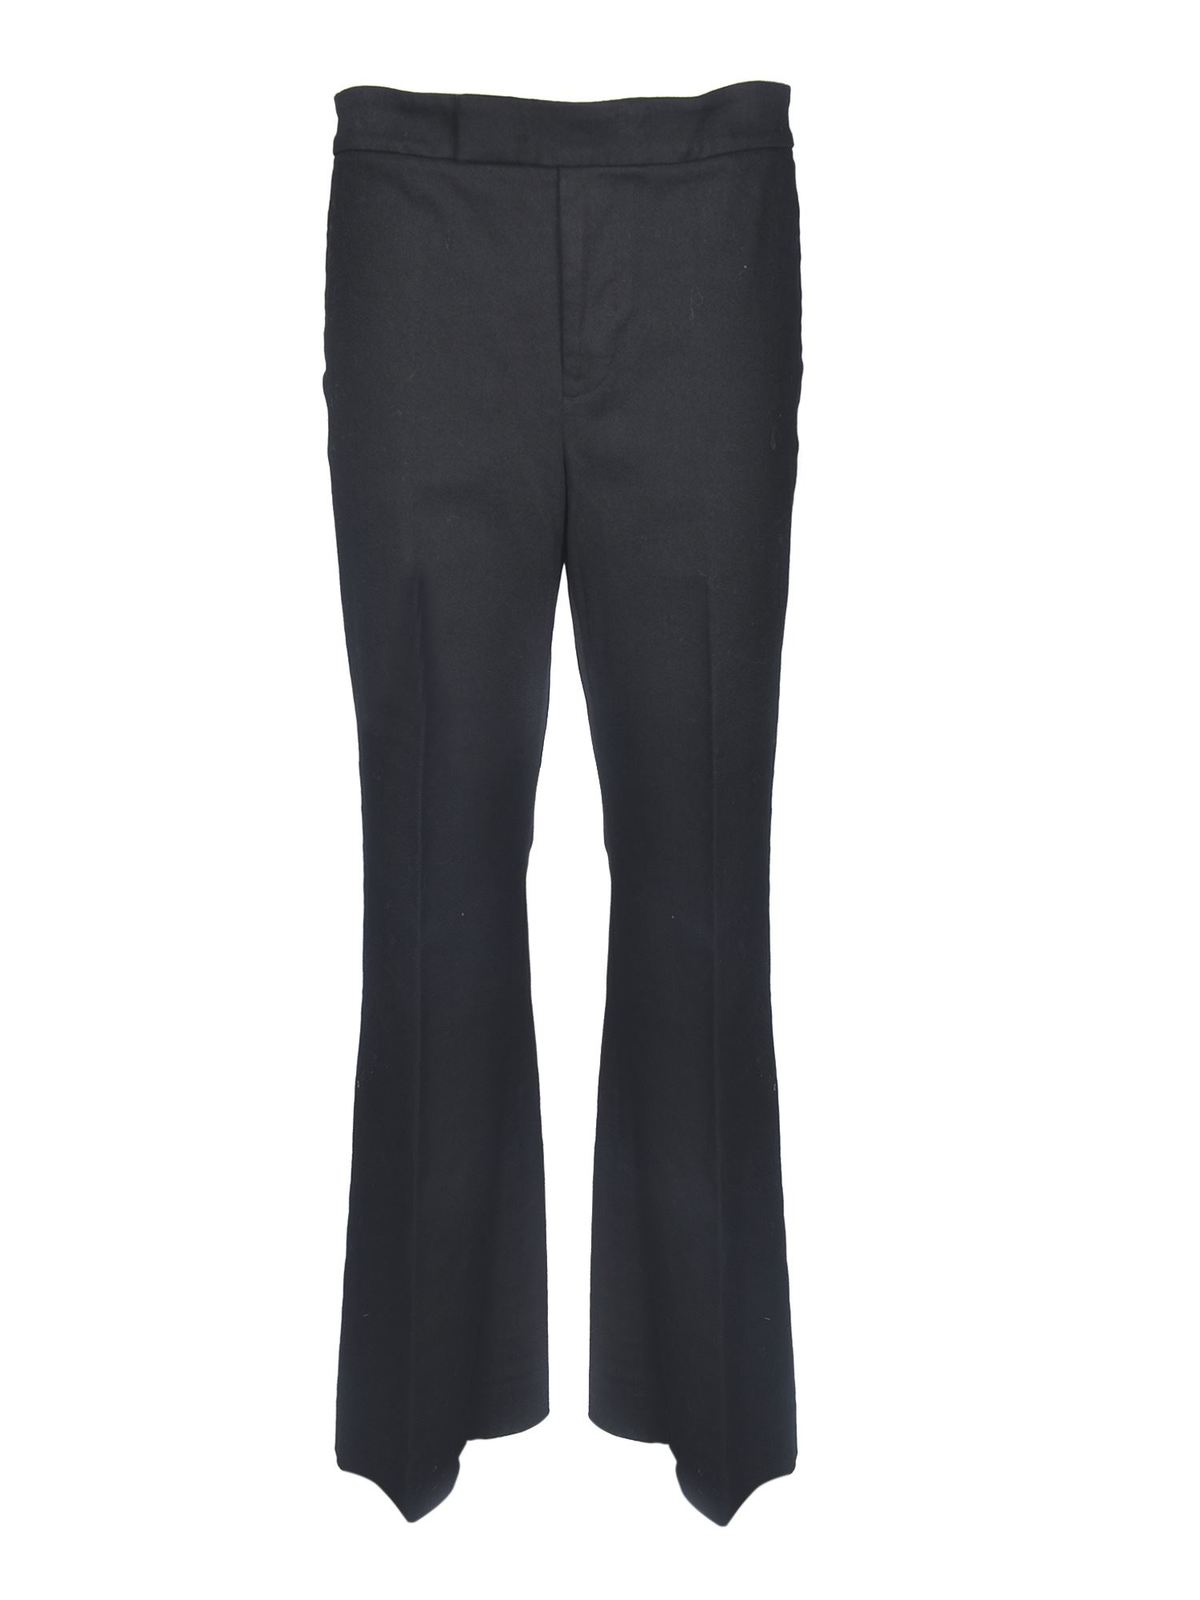 Casual trousers Polo Ralph Lauren - Flared pants in black - 211805672001